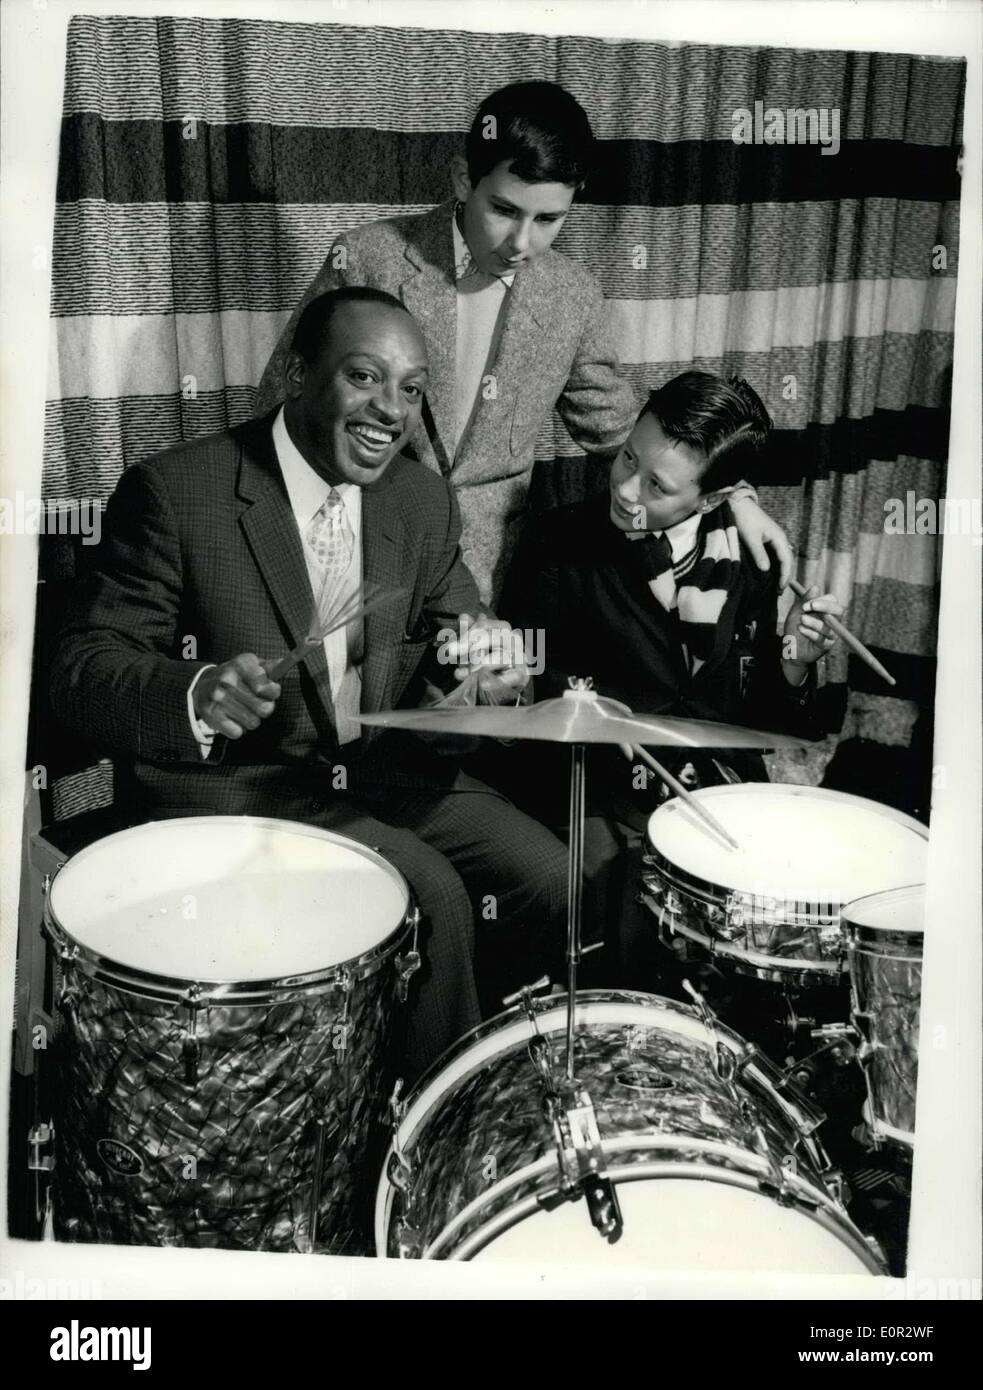 Oct. 19, 1957 - World Famous american Jazz player Teaches two London schoolboys to plays the drums. Lionel Hampton the famous American coloured Jazz- player has agreed to teach two London schoolboys Robin Brown (13) and his brother Jed (11) to day the drums. The boys are fans of Lionel Hampton - and are always playing his records. They hope to see him when he arrived in London - but his only performance was at a midnight charity matinee - and they could not attend . They telephoned him - and aske if they could she himplay - and he said ''I will do better than that - I will teach you Stock Photo